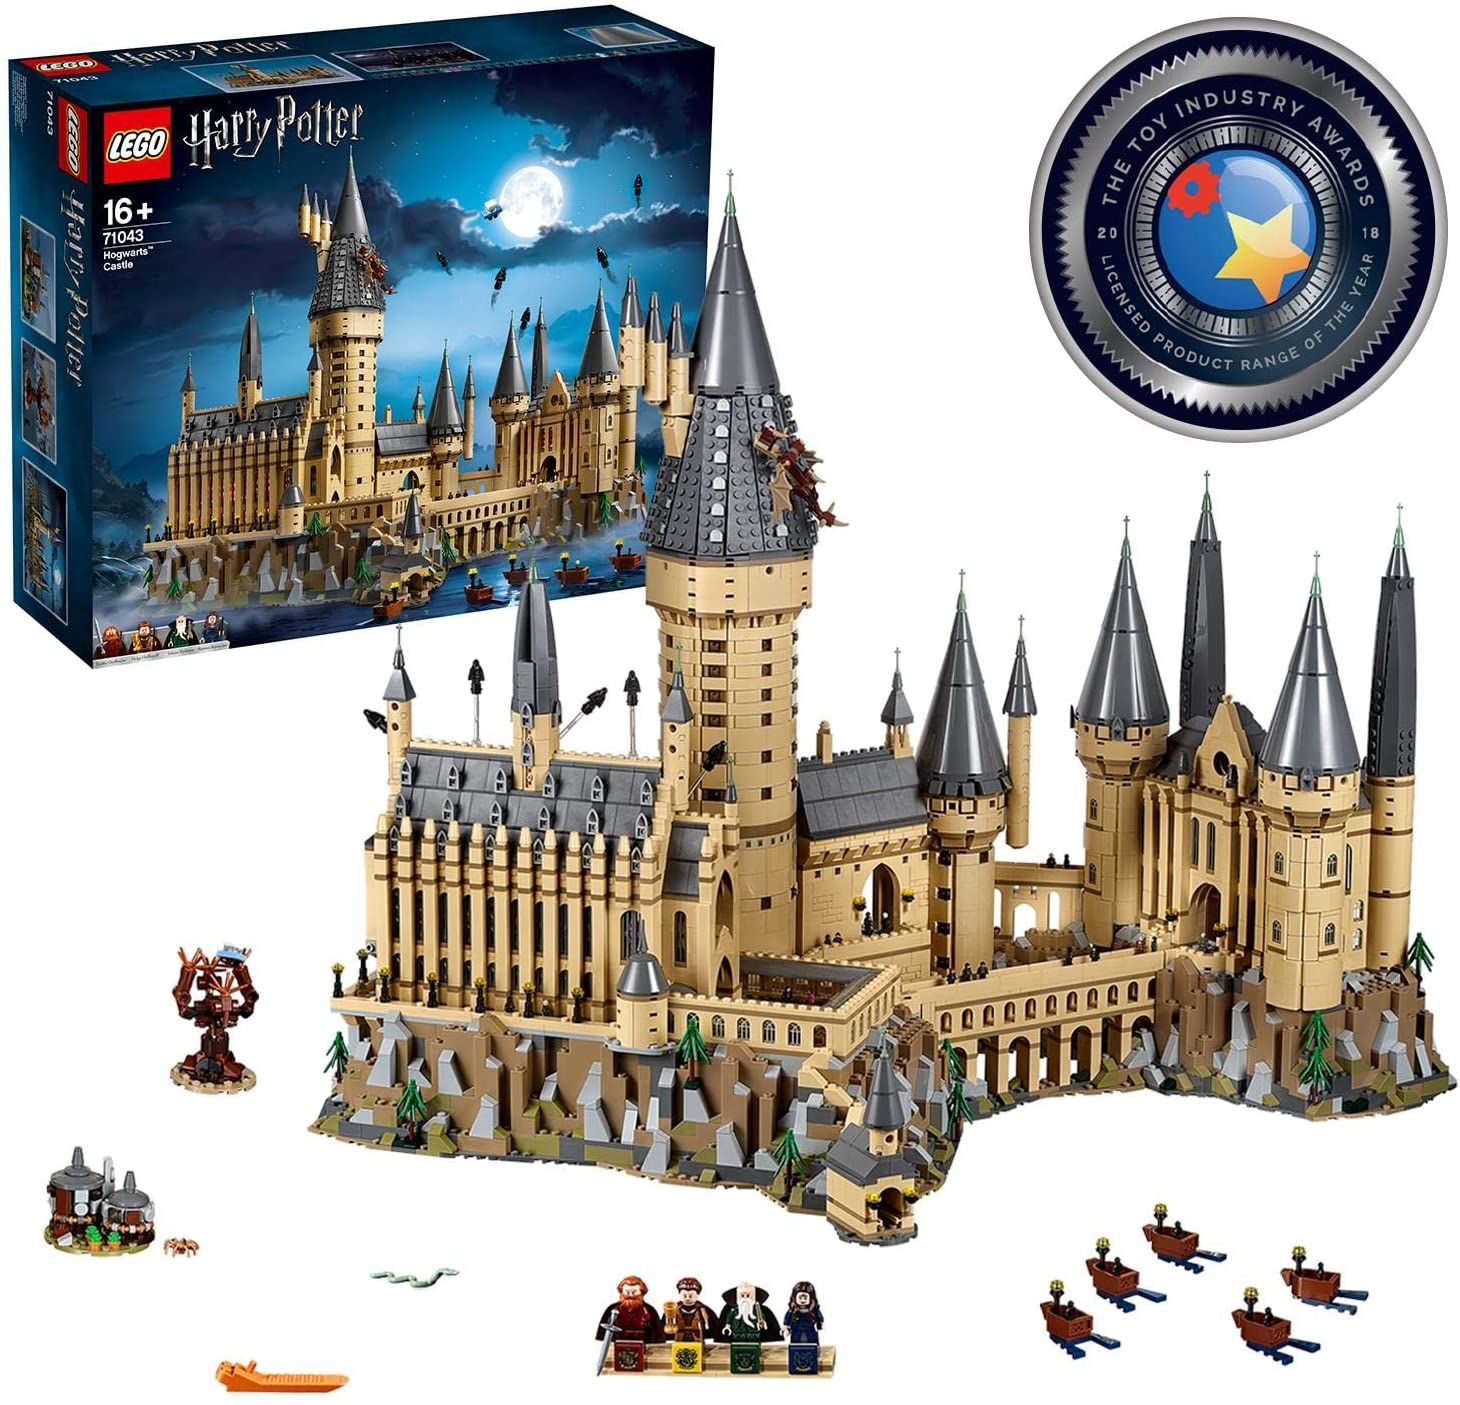 Null LEGO 71043 Harry Potter Hogwarts castle - sold as new with possible packagi&hellip;